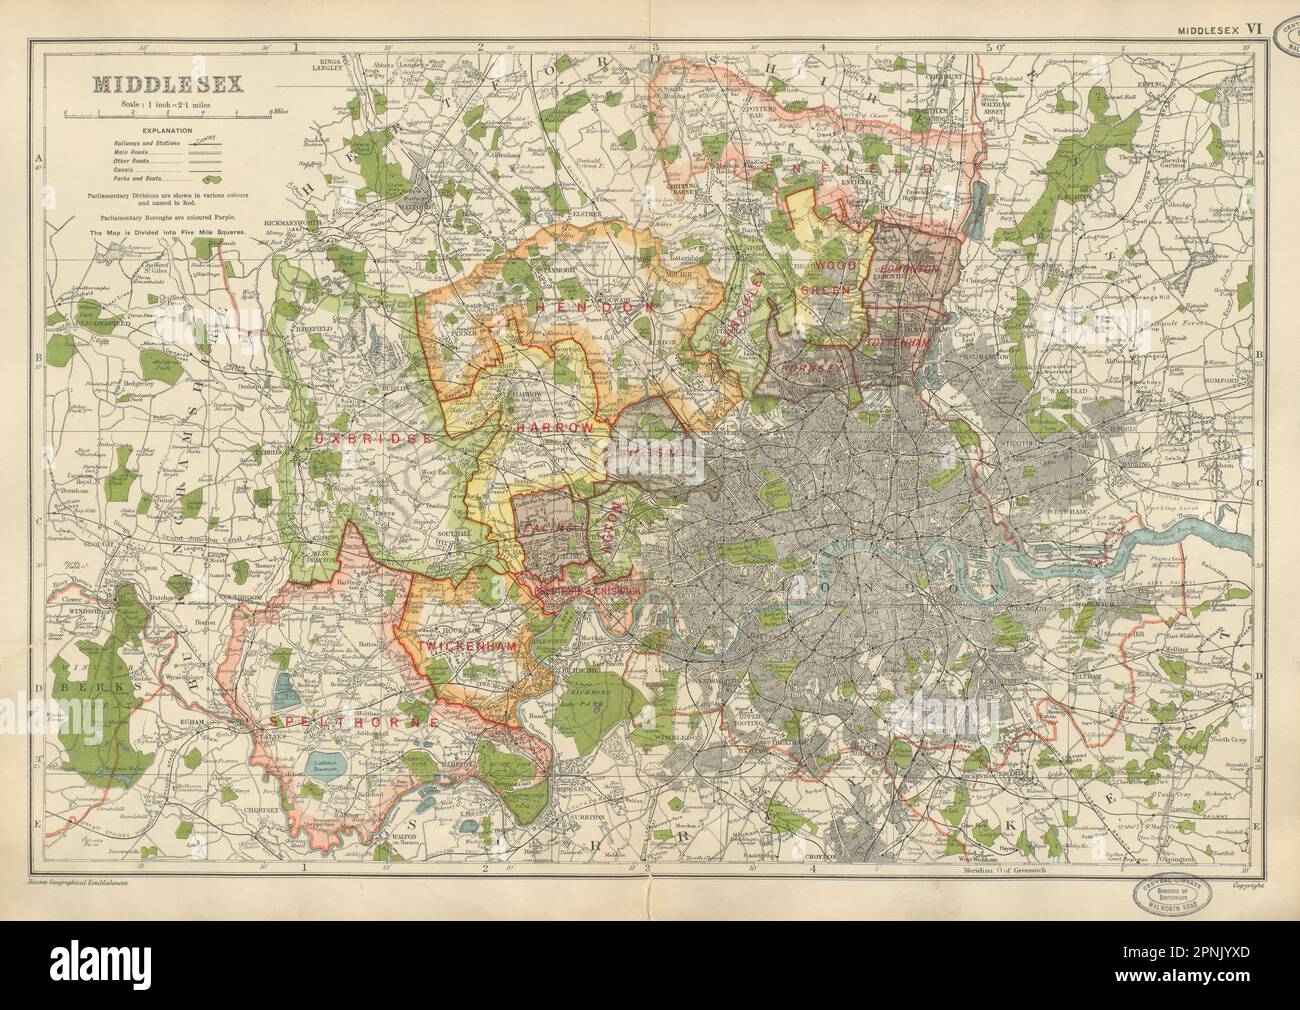 MIDDLESEX showing Parliamentary divisions parks boroughs.London.BACON 1934 map Stock Photo